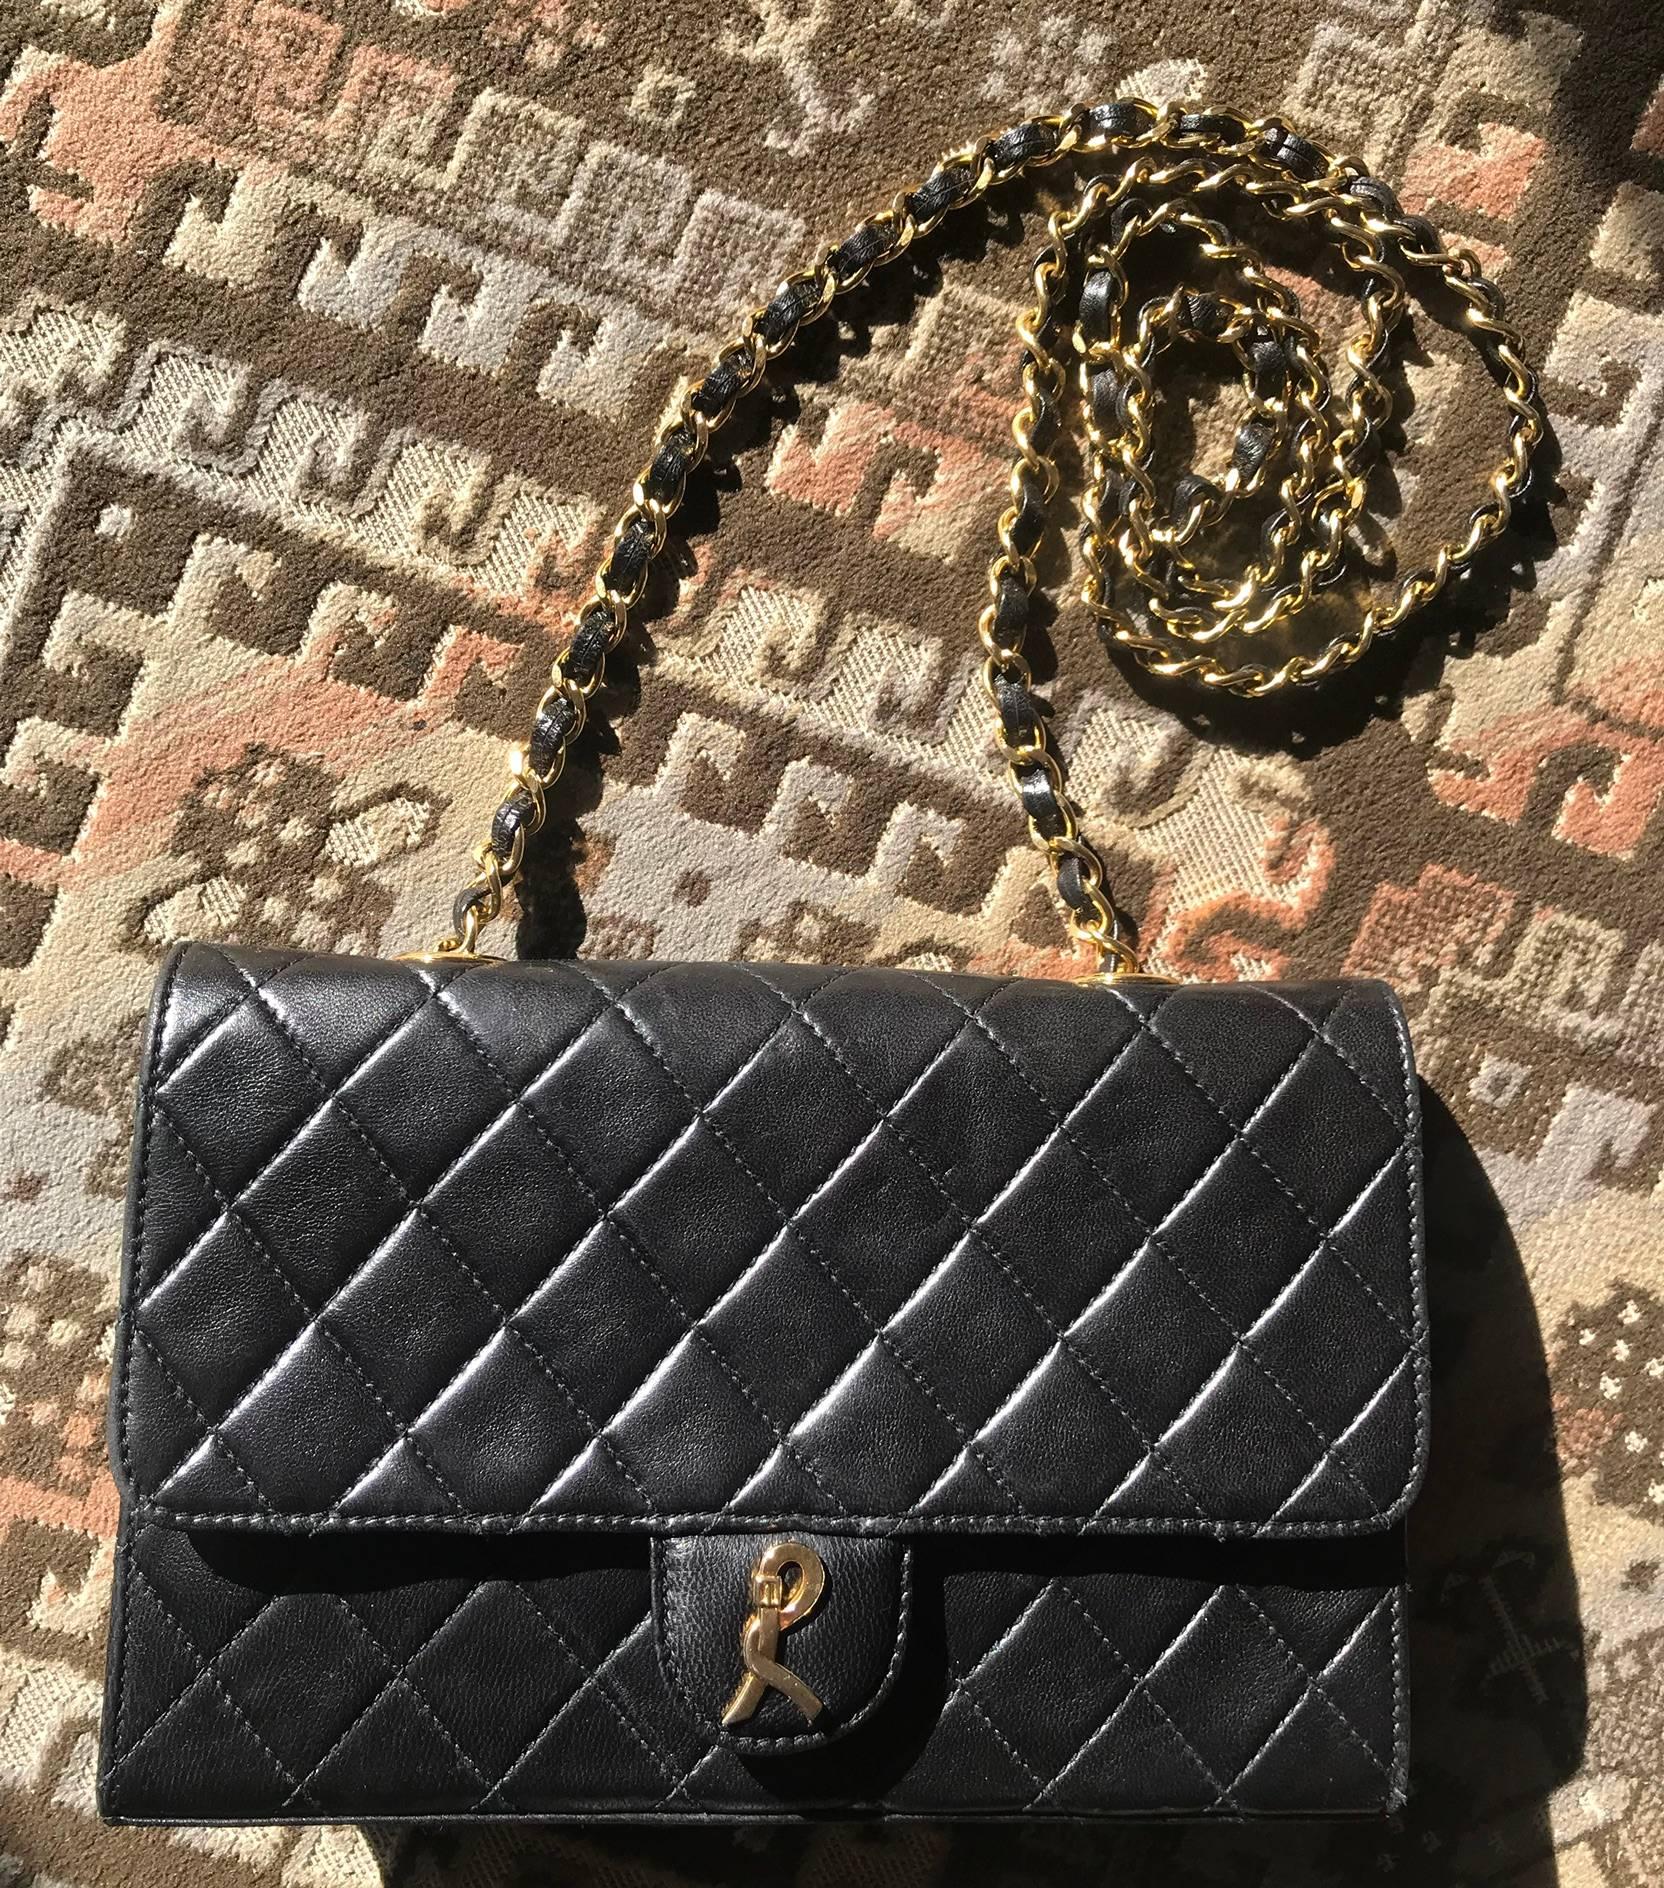 1980s. Vintage Roberta di Camerino, AMBASSADOR collection, classic 2.55 matelasse style lamb leather chain shoulder bag with golden R motif.

Here is one of the rarest vintage pieces from Roberta di Camerino back in the 80’s, AMBASSADOR